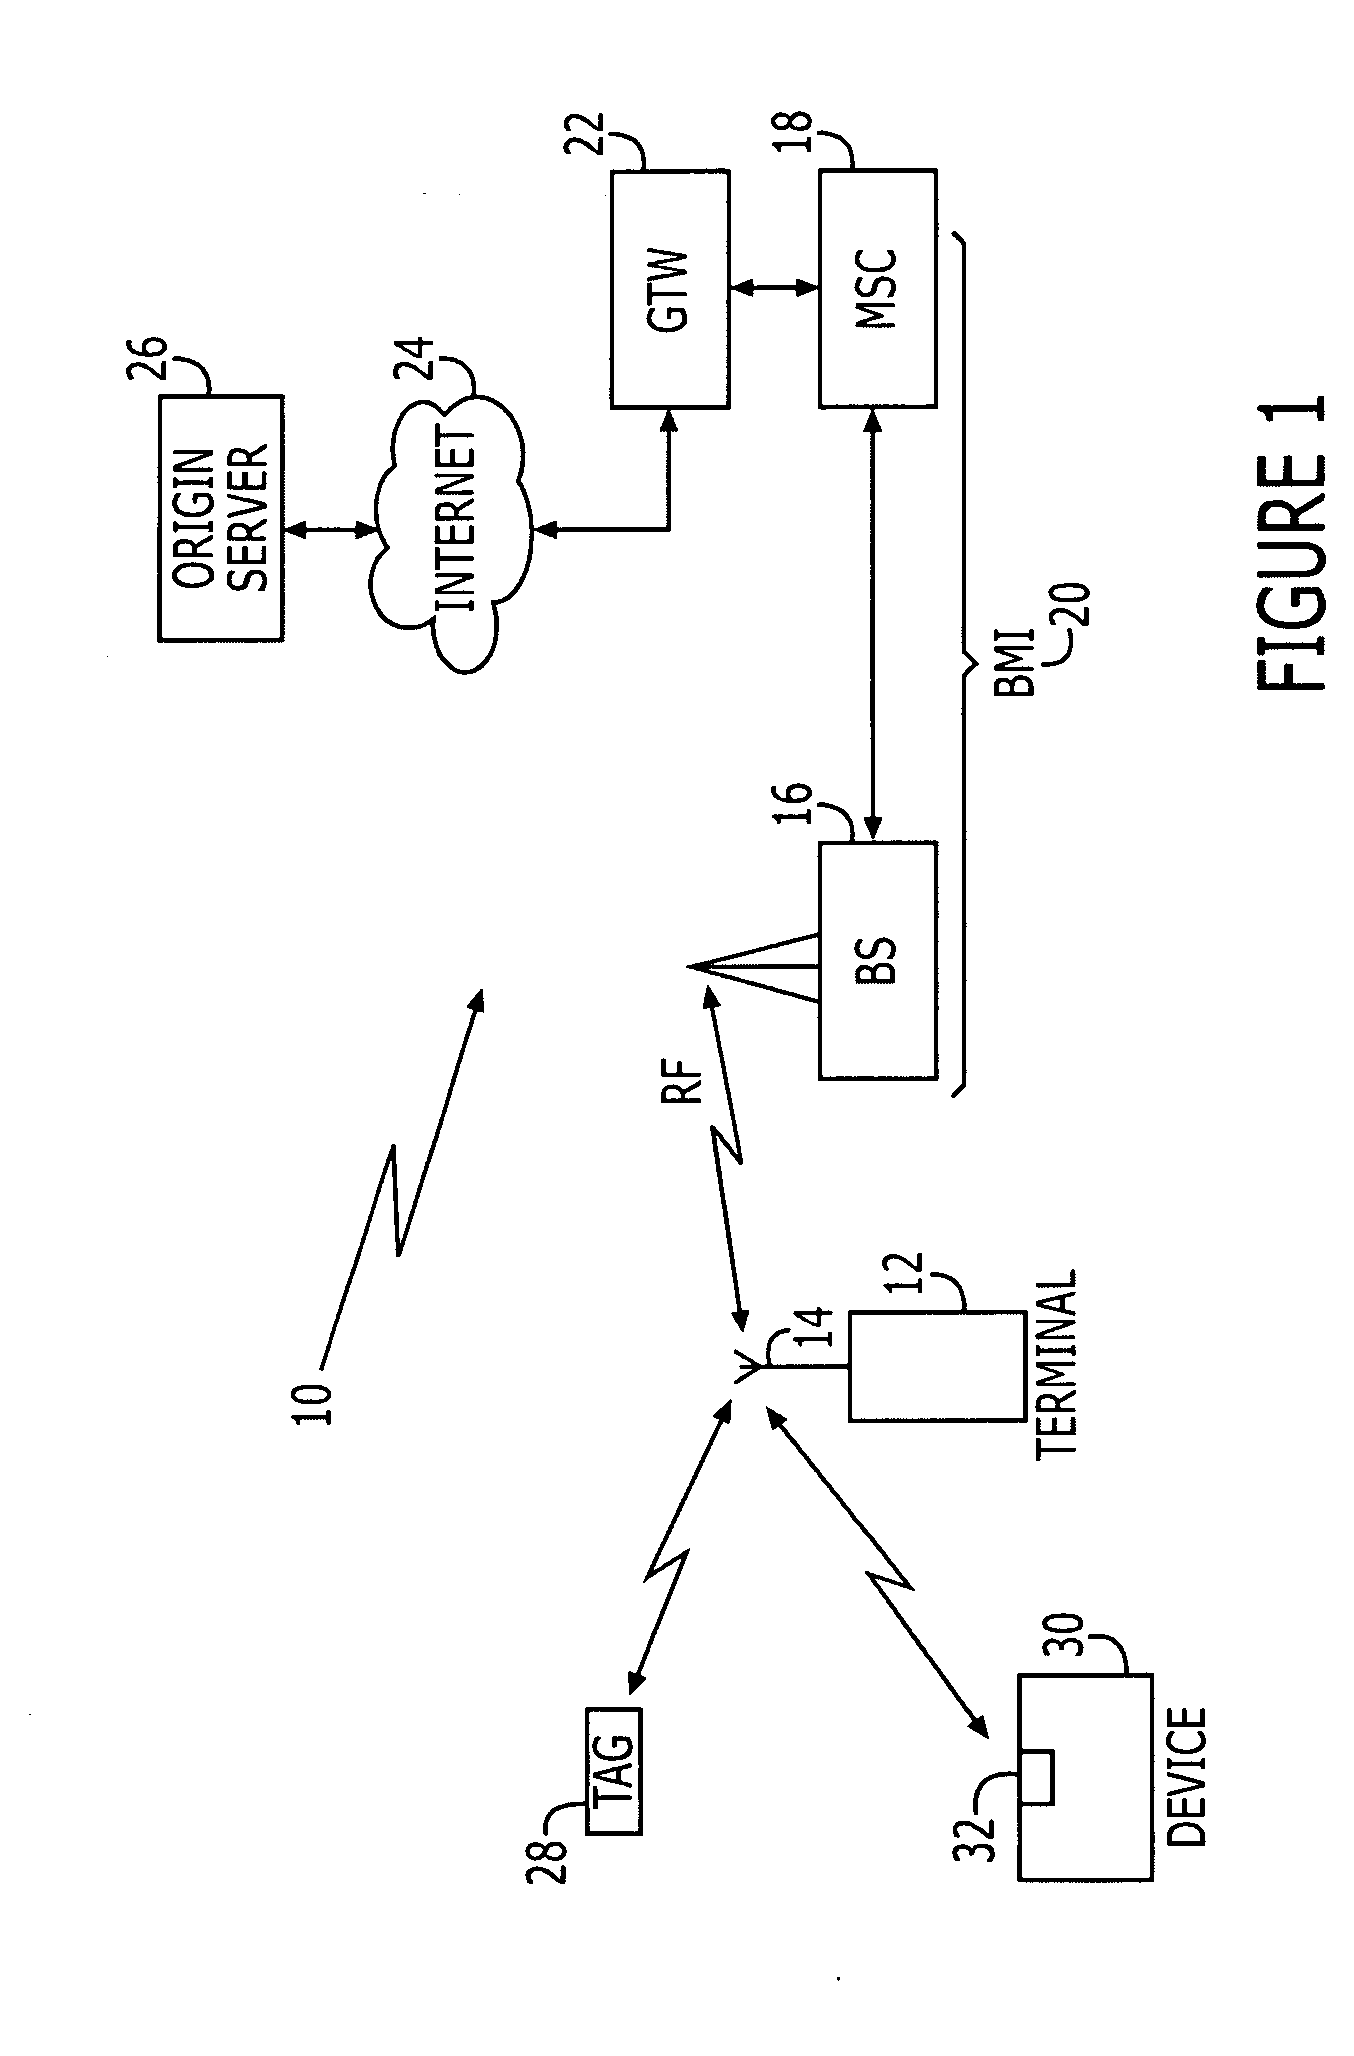 Methods, systems, devices and computer program products for providing dynamic product information in short-range communication